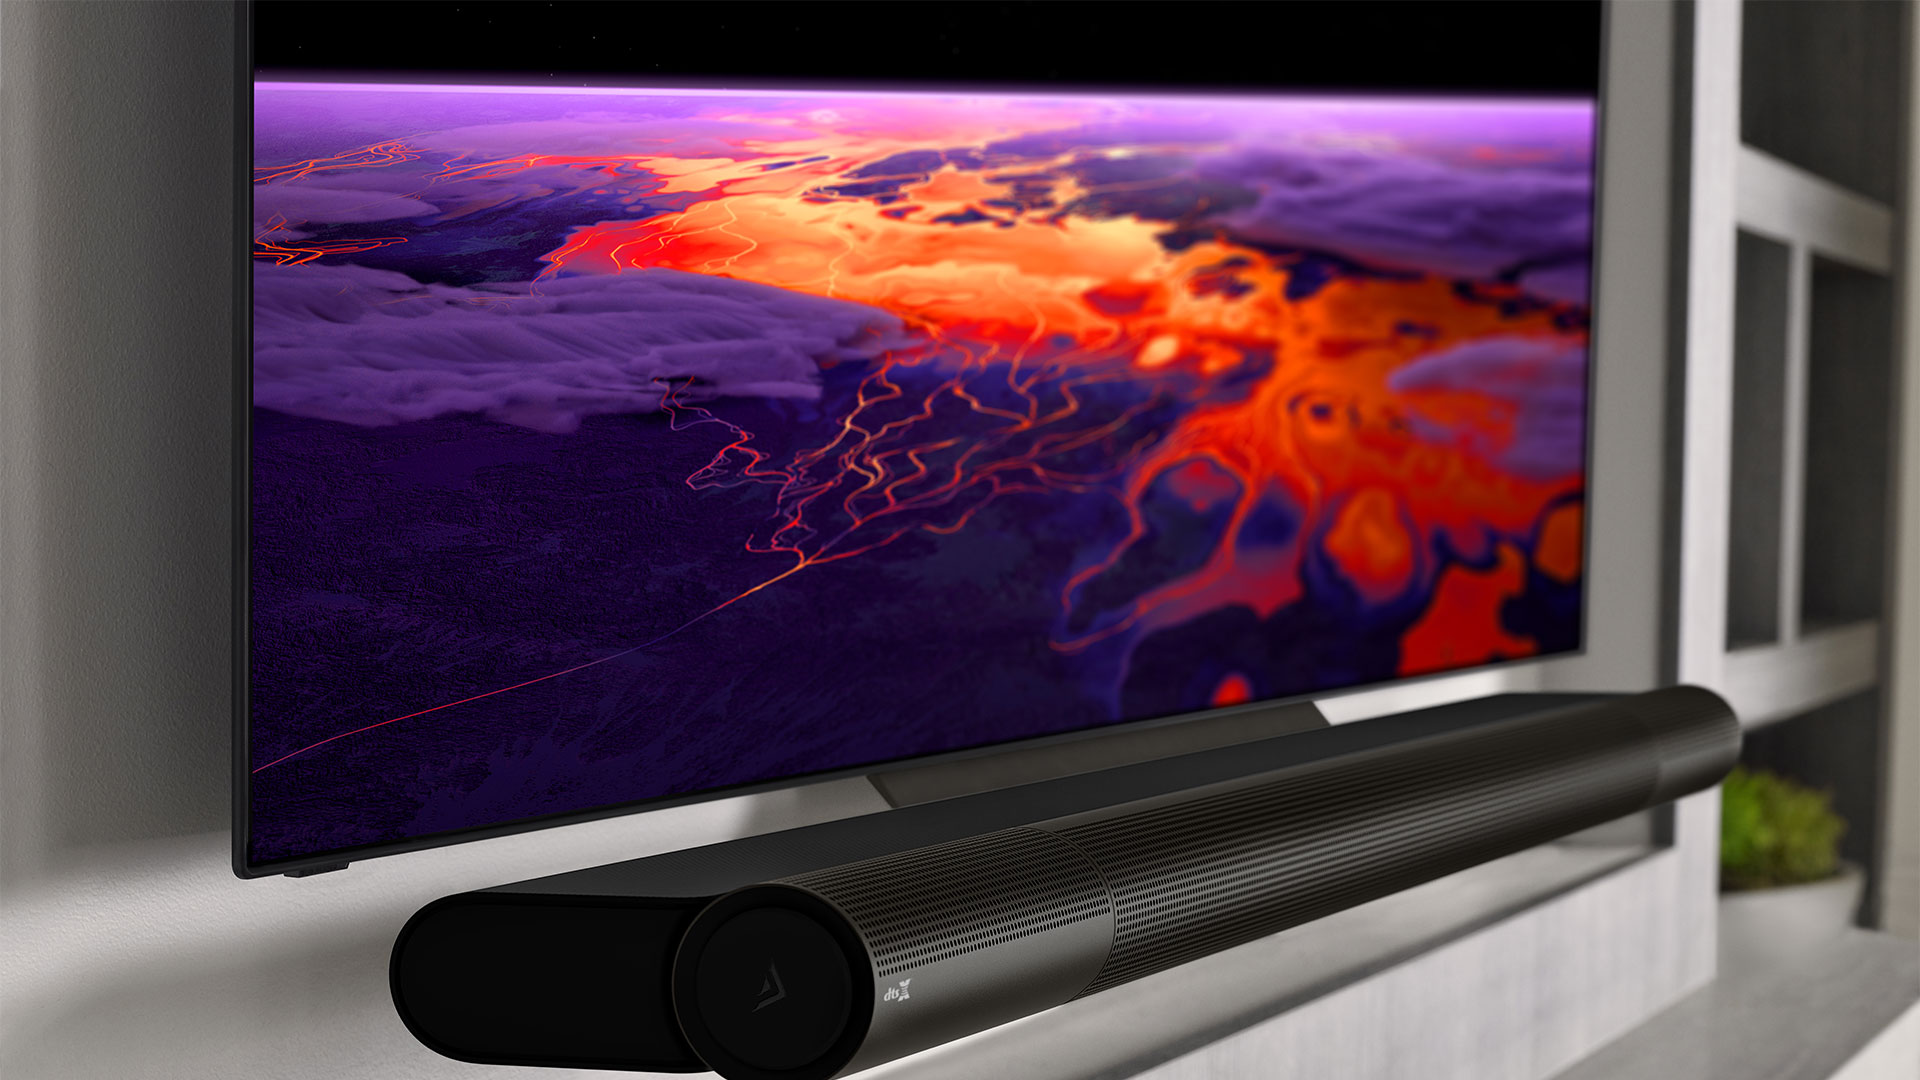 how to airplay from mac to vizio tv